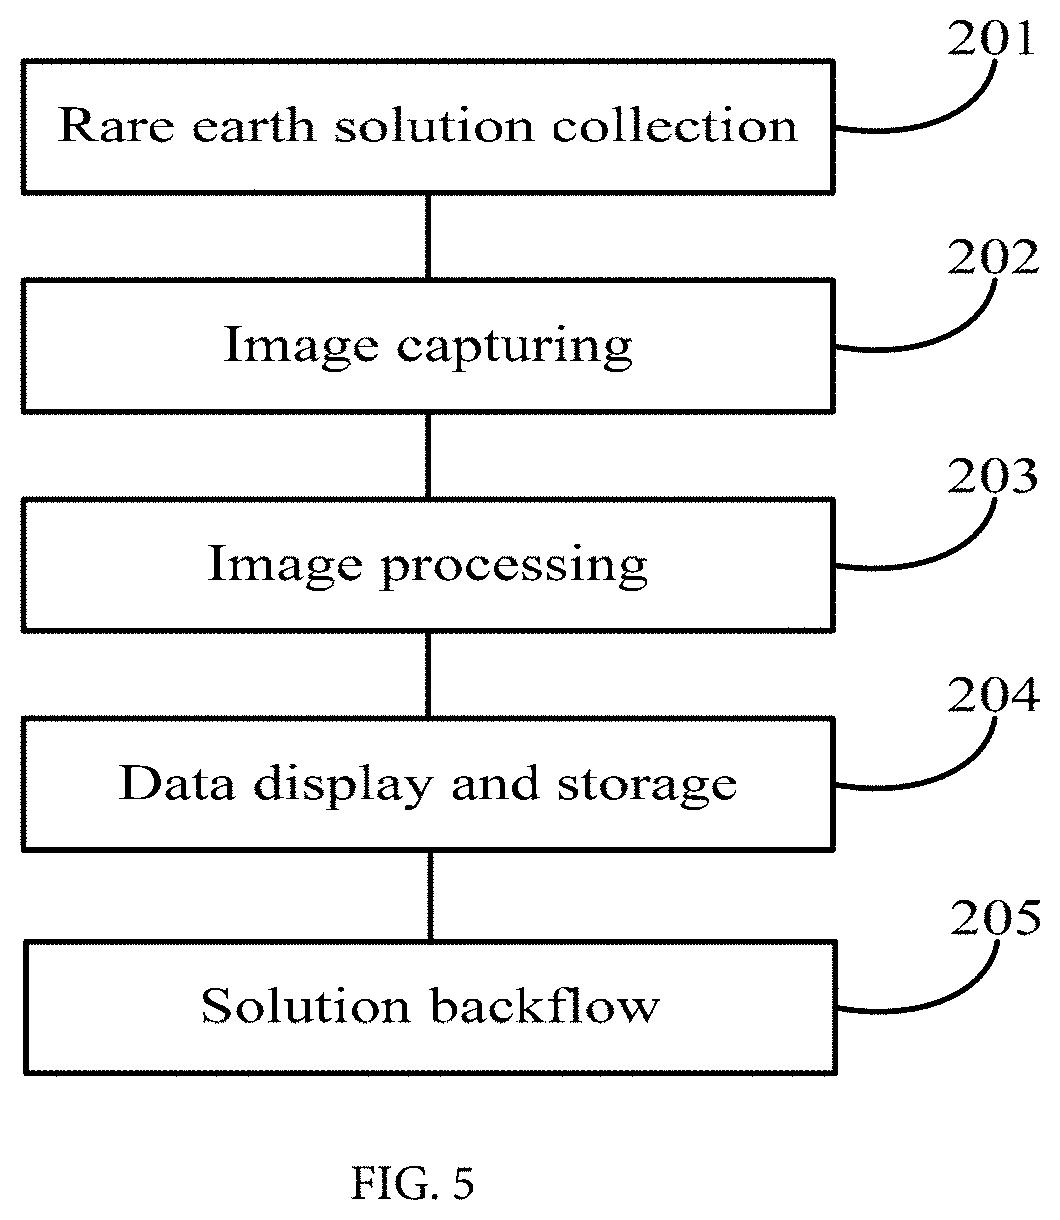 Rare earth solution image capture device and method